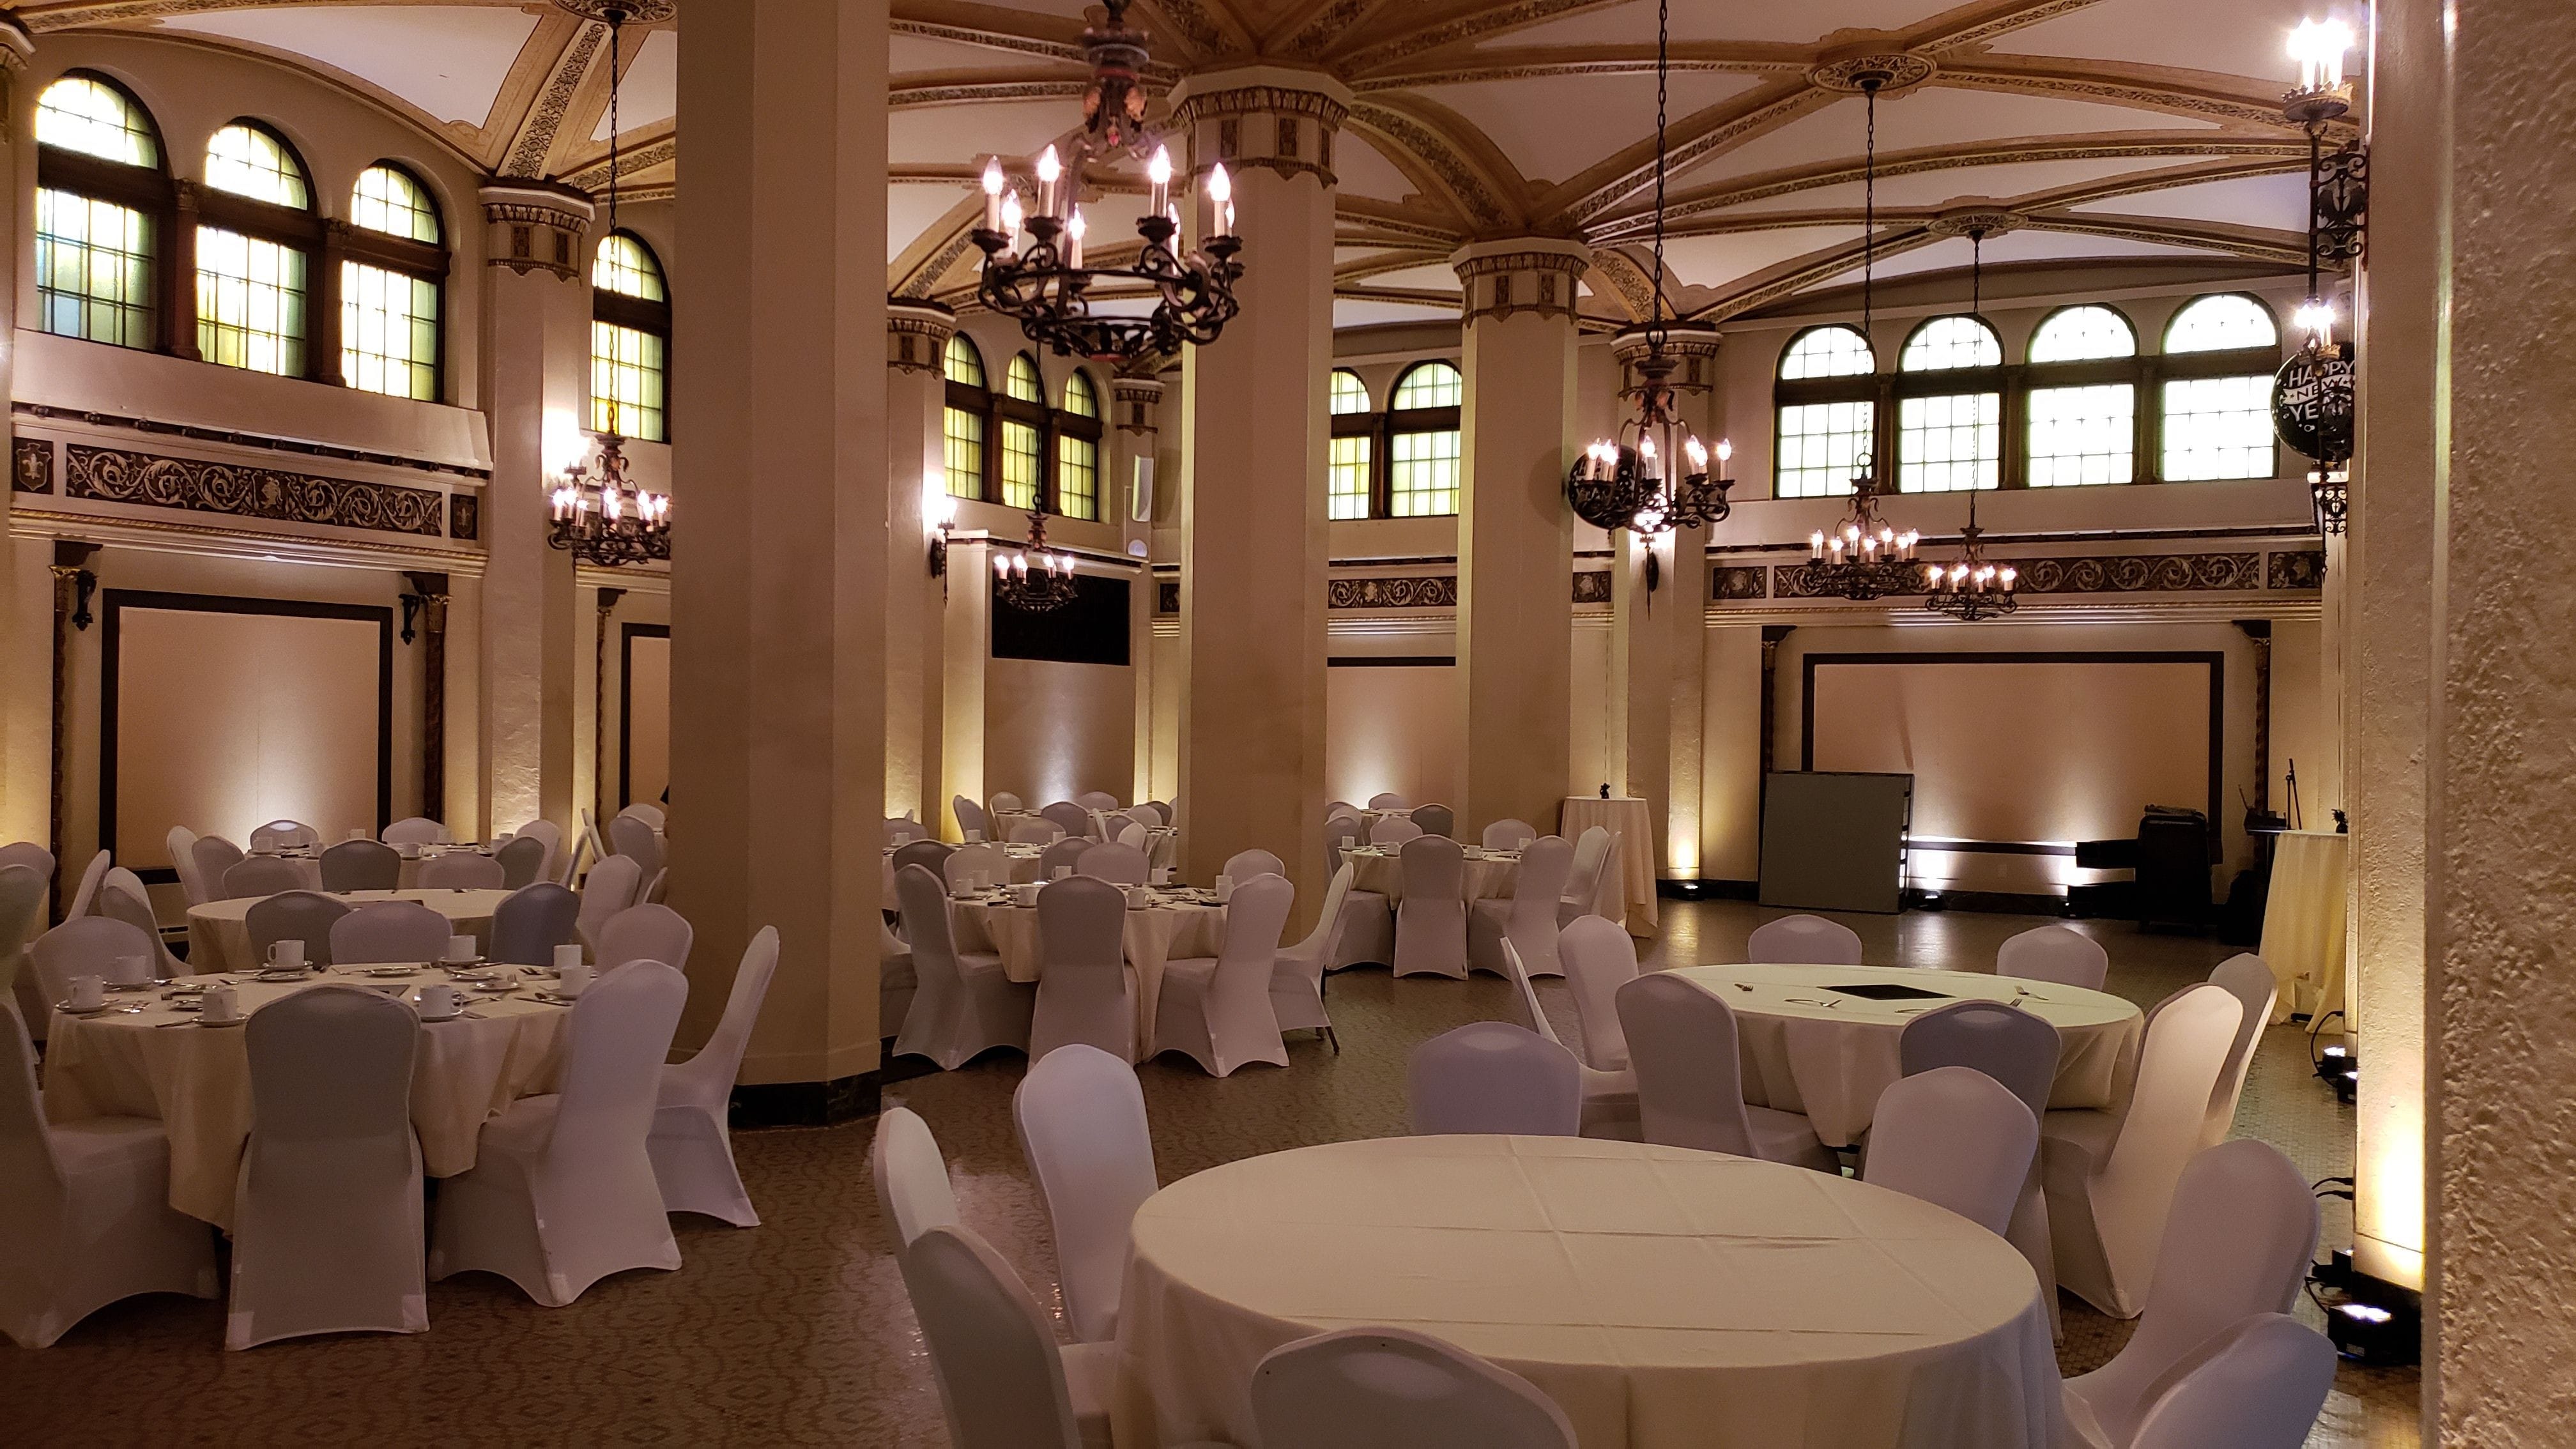 Wedding lighting in the Moorish Room at Greysolon Plaza. Up lighting in soft gold and soft white.